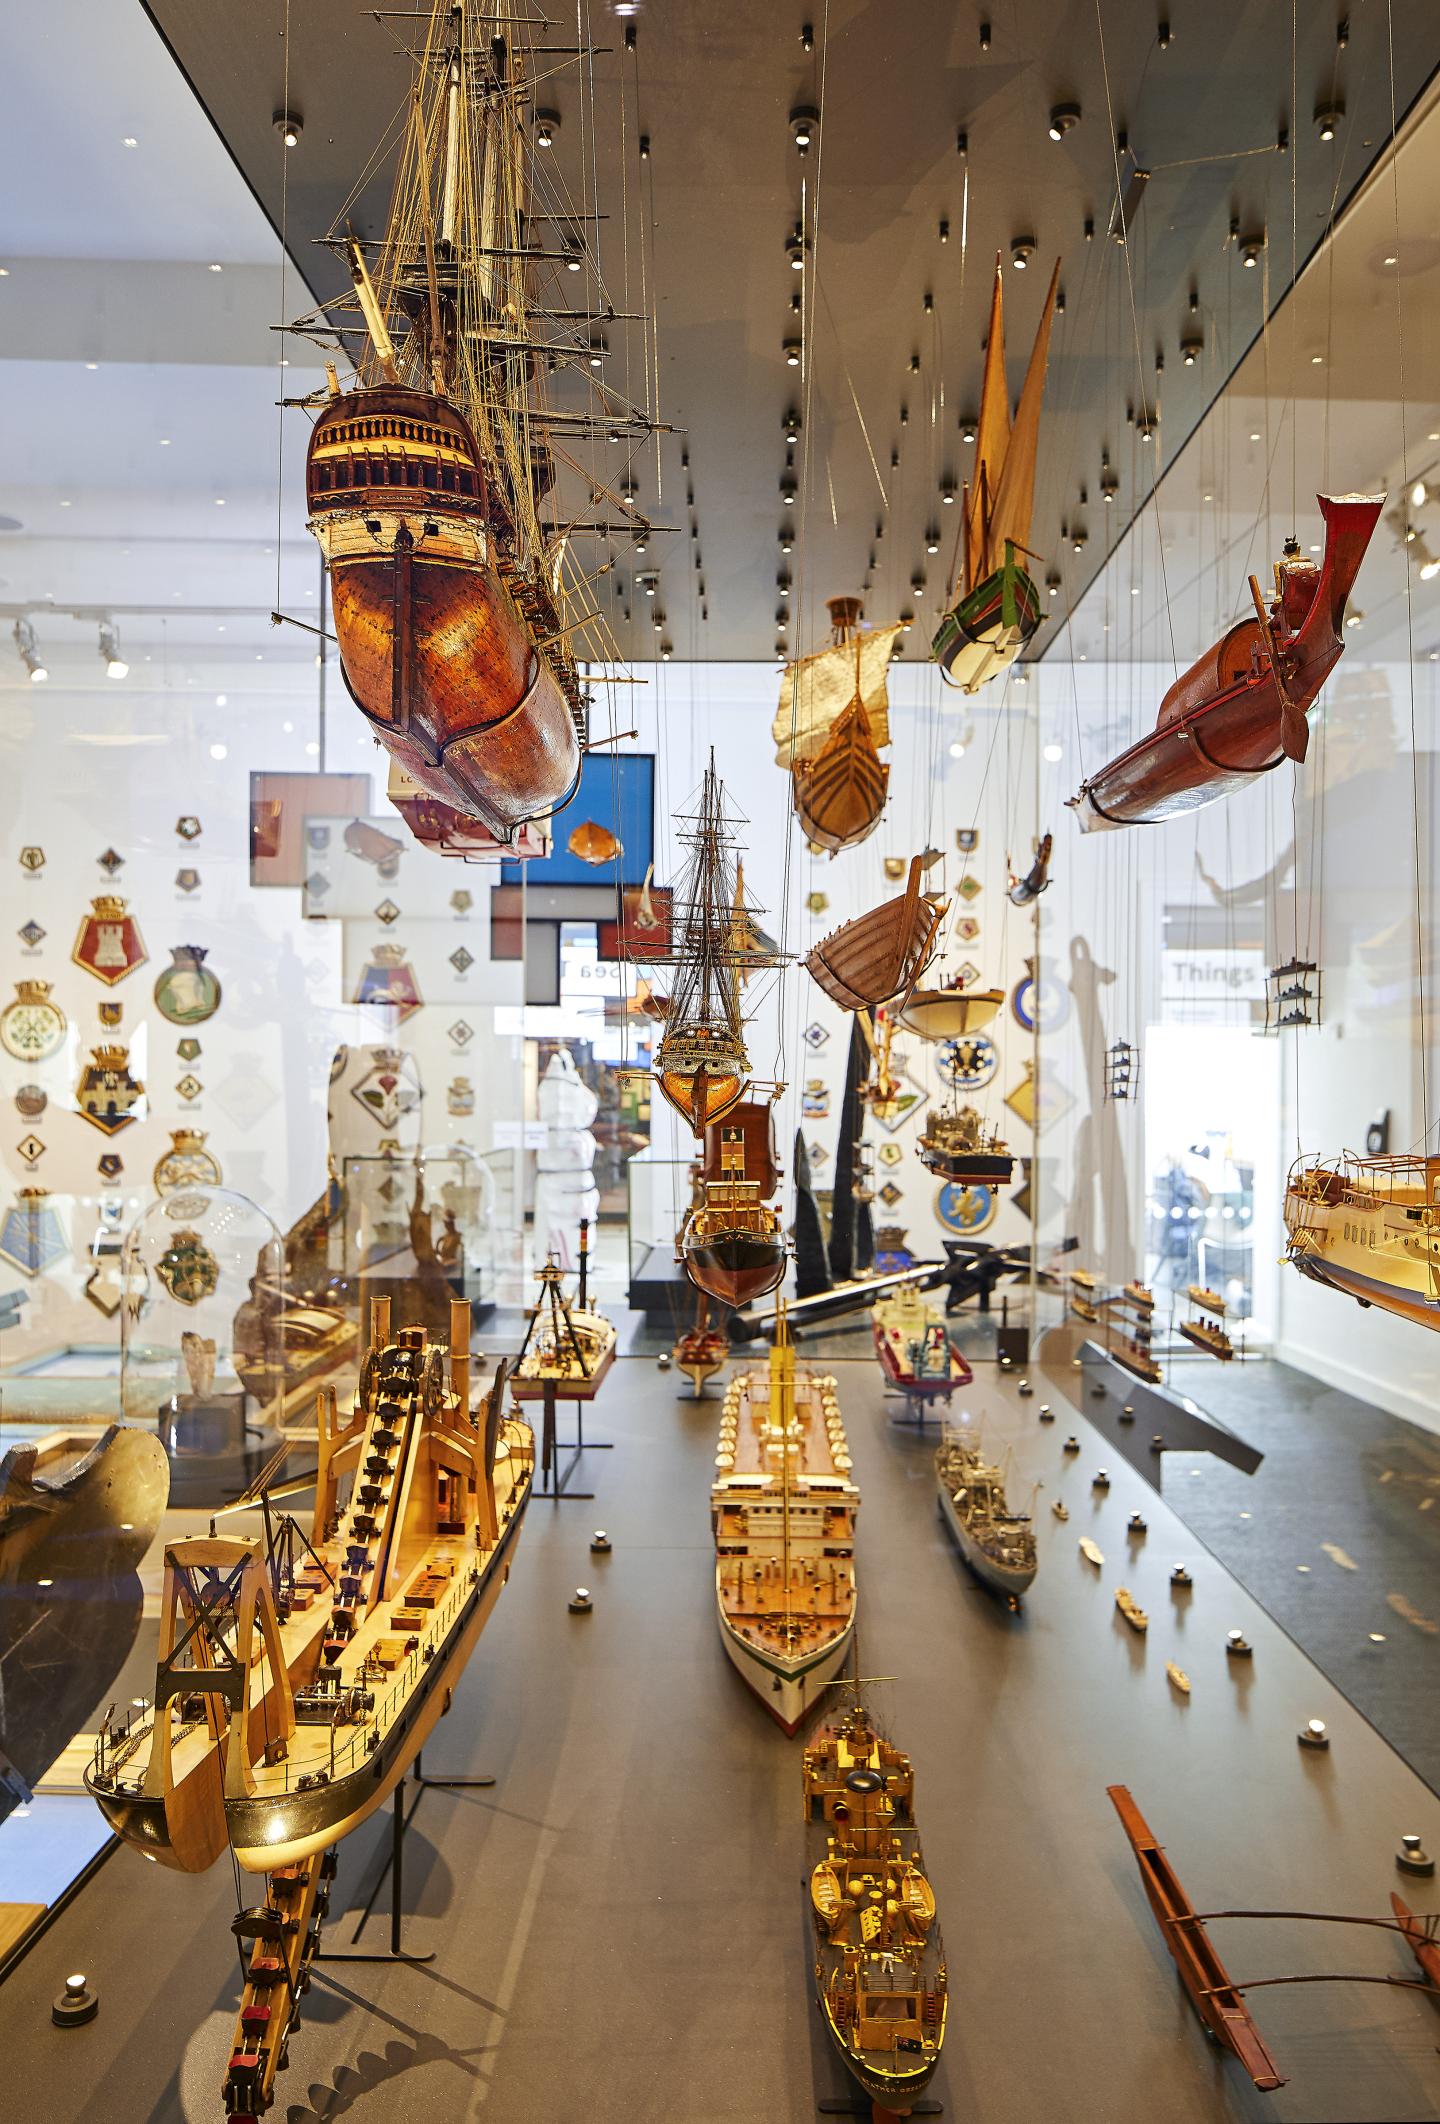 An image showing multiple wooden ship models depicting a range of different types of boats and vessels hanging or on the display bottom which is surrounded by glass